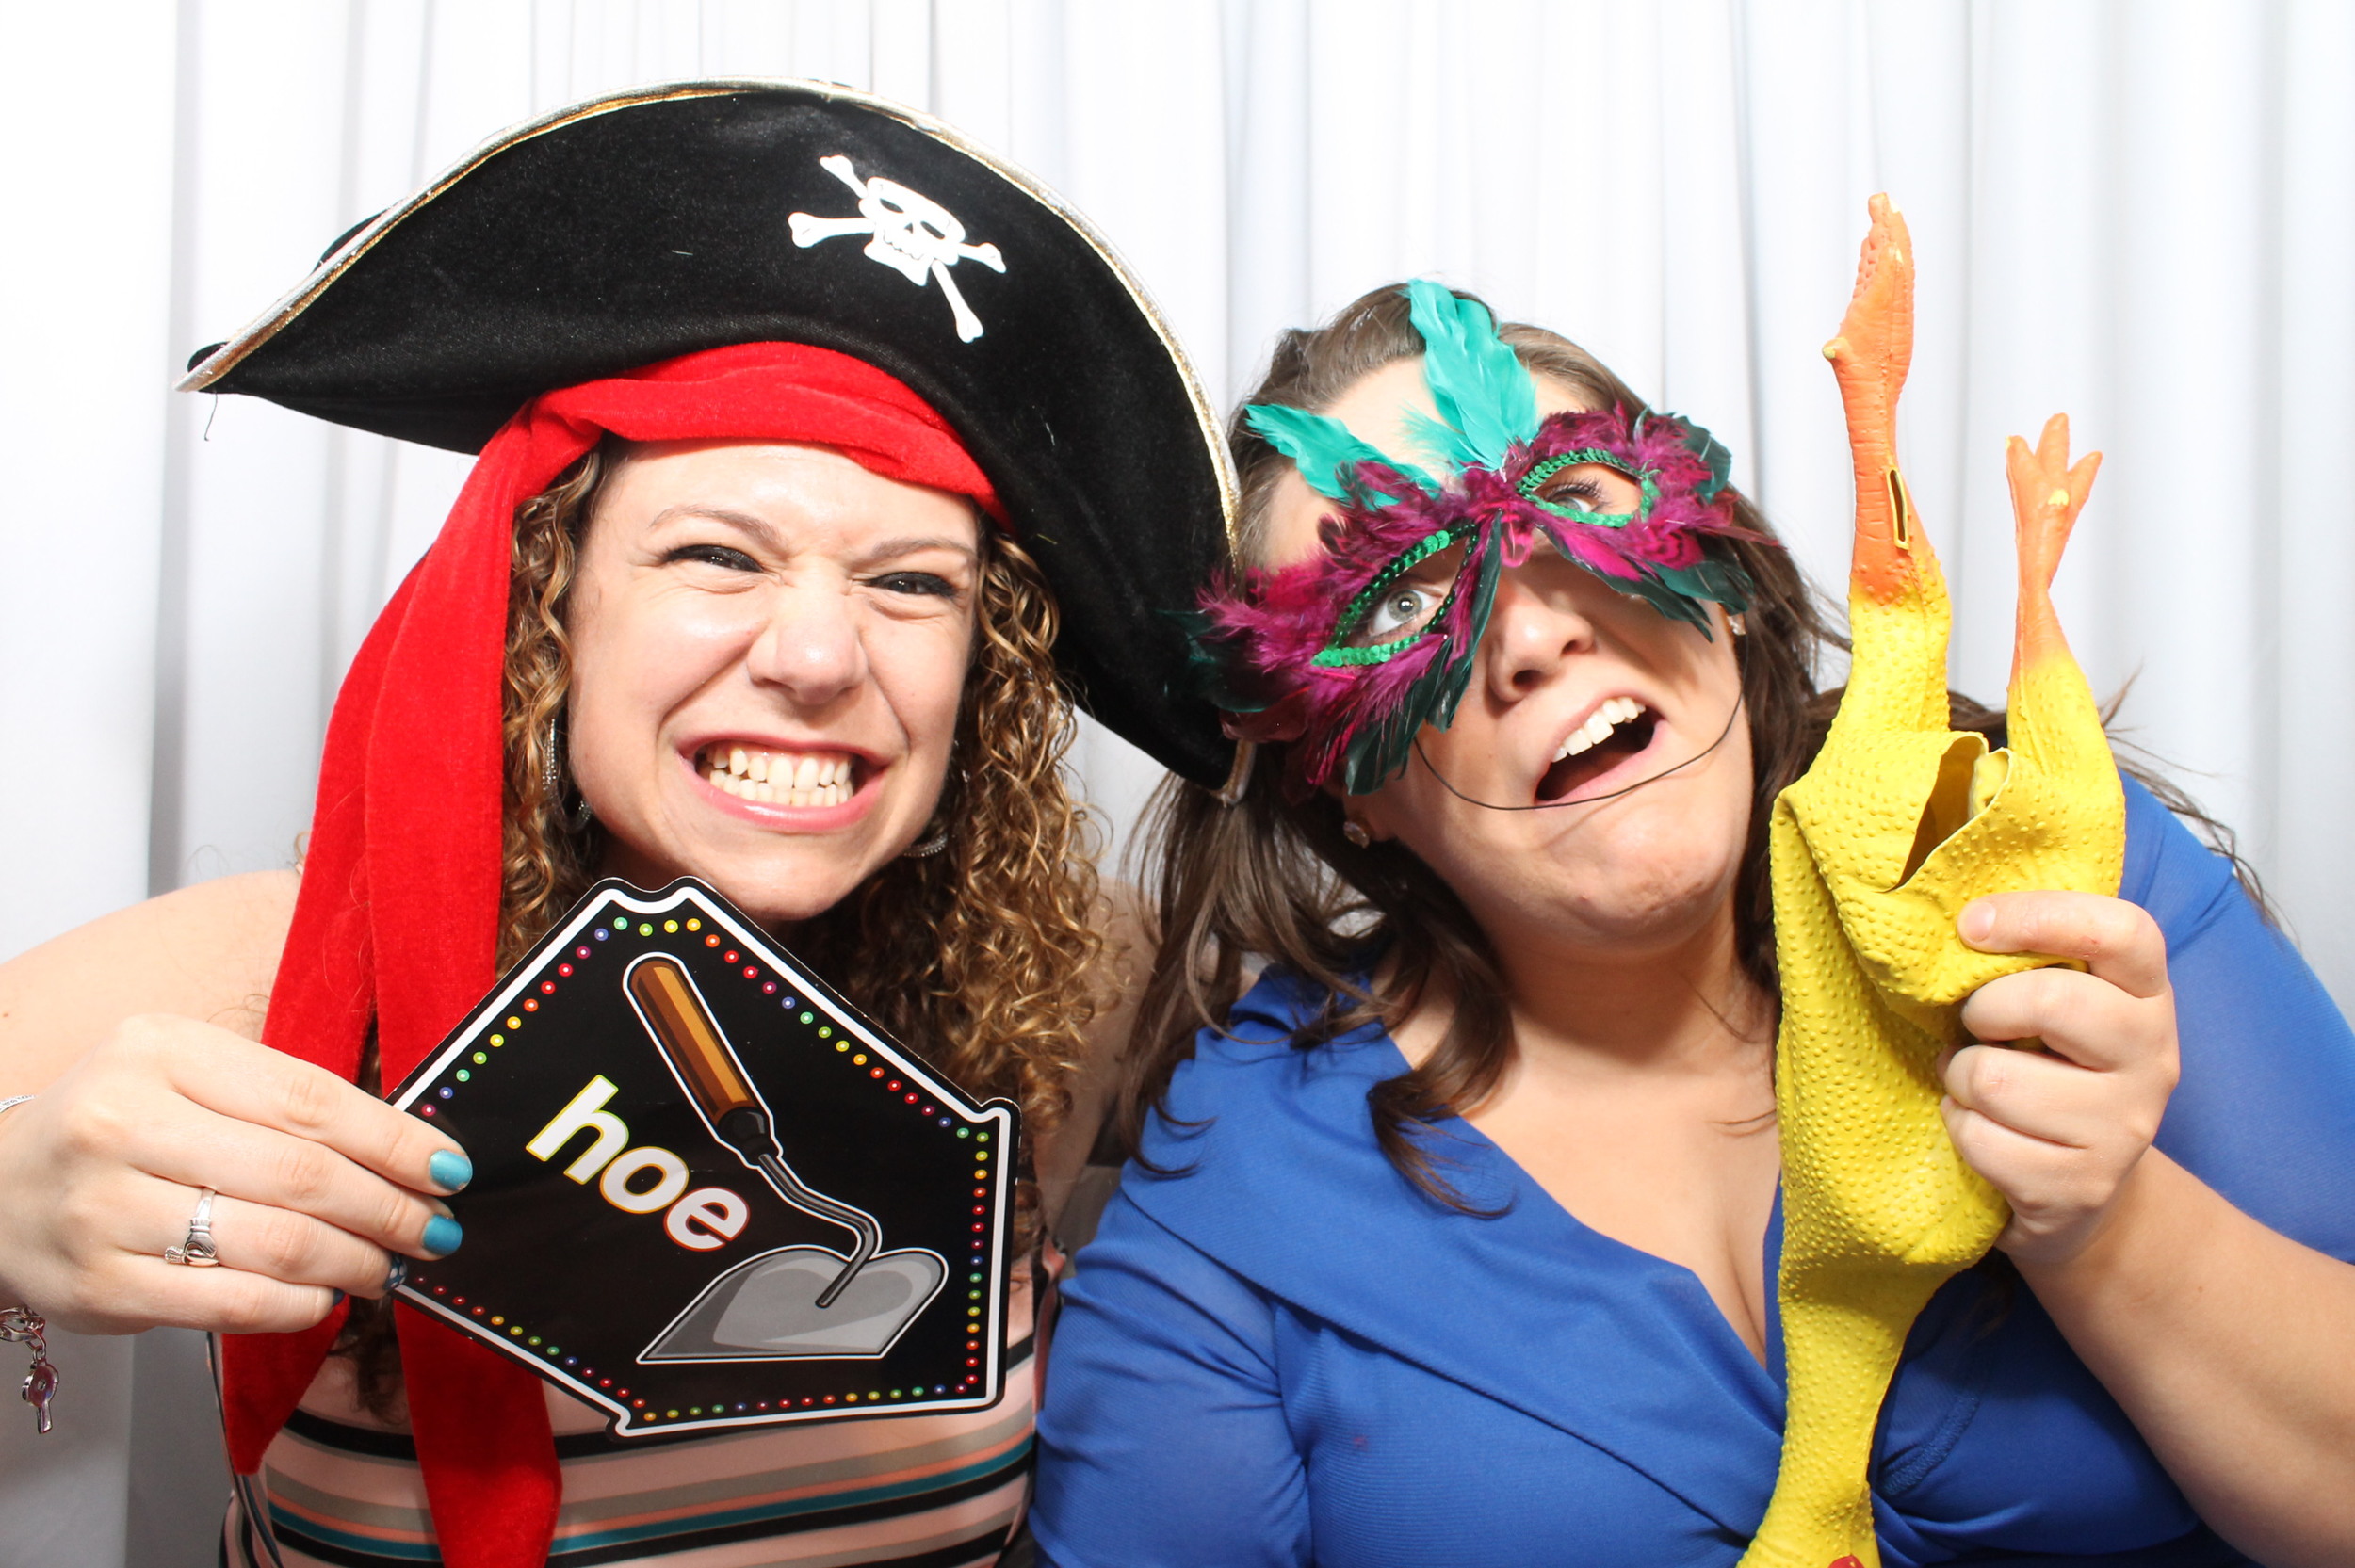 Snapshot Photobooth at the DoubleTree in Tinton Falls, New Jersey